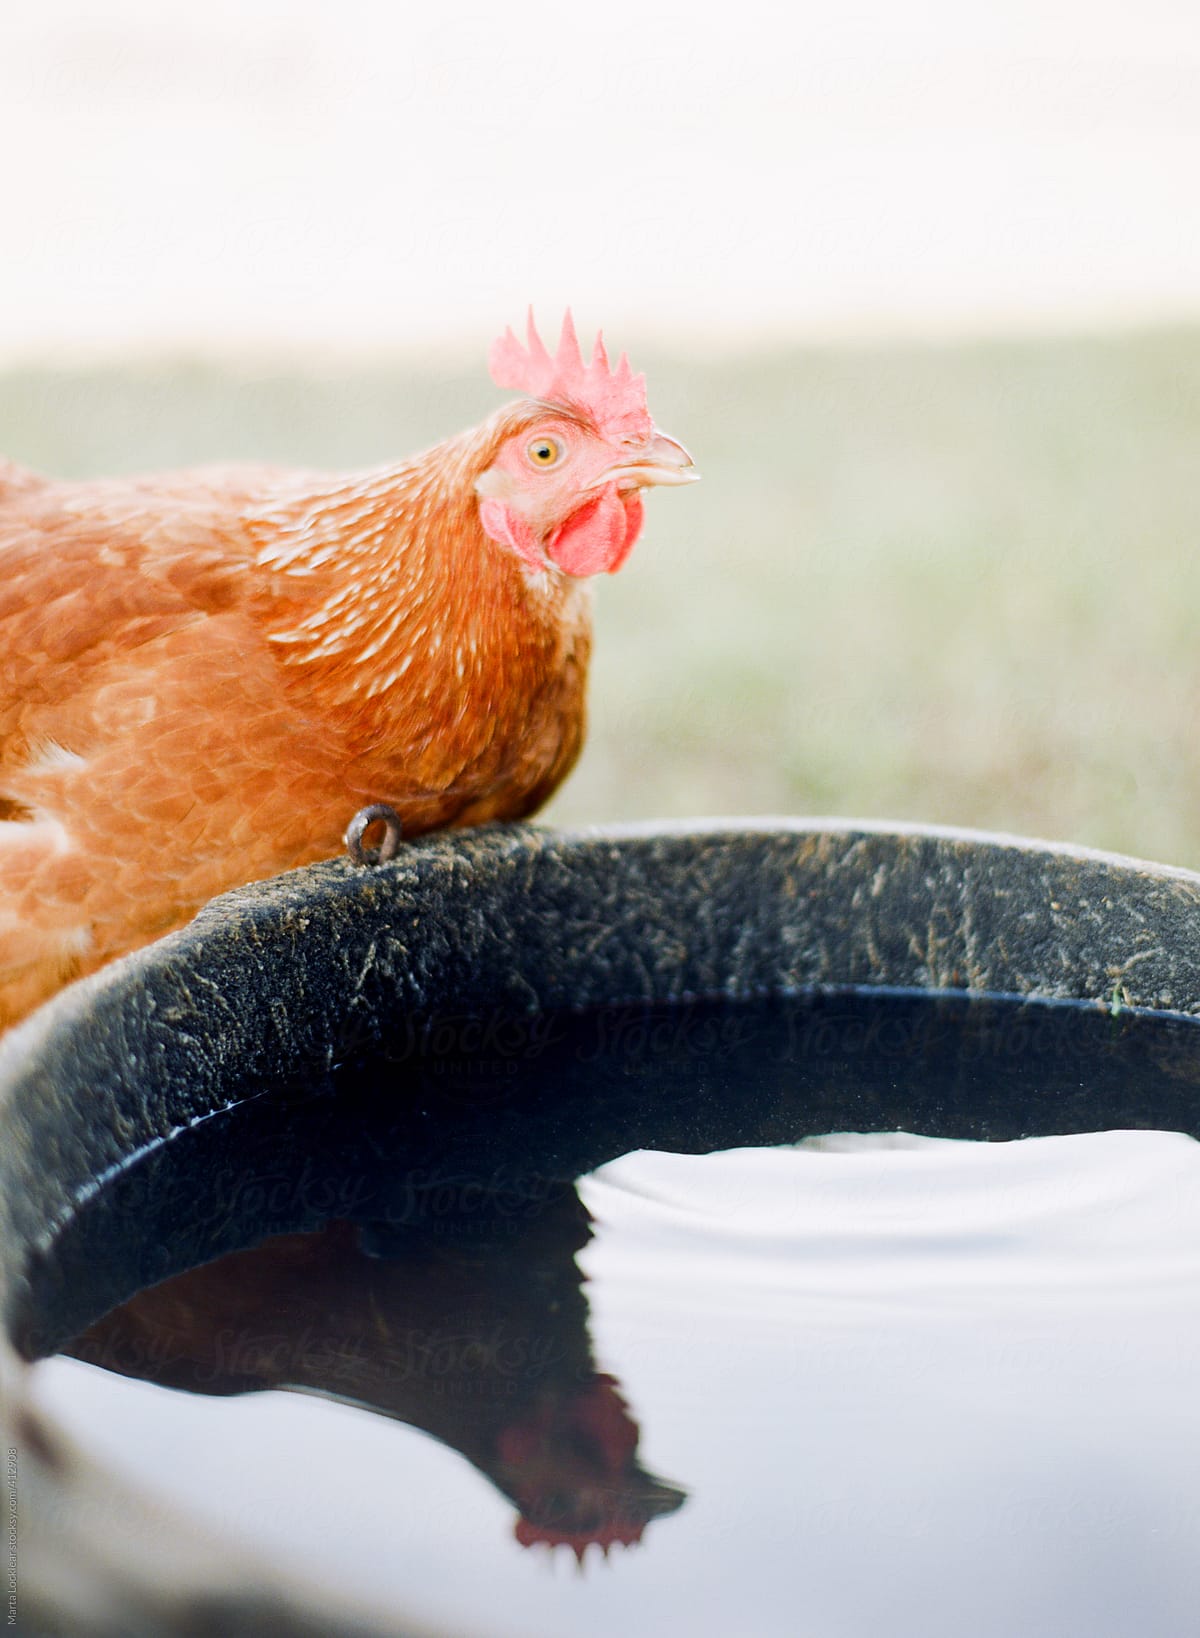 Chicken drinking from a pail of water with reflection